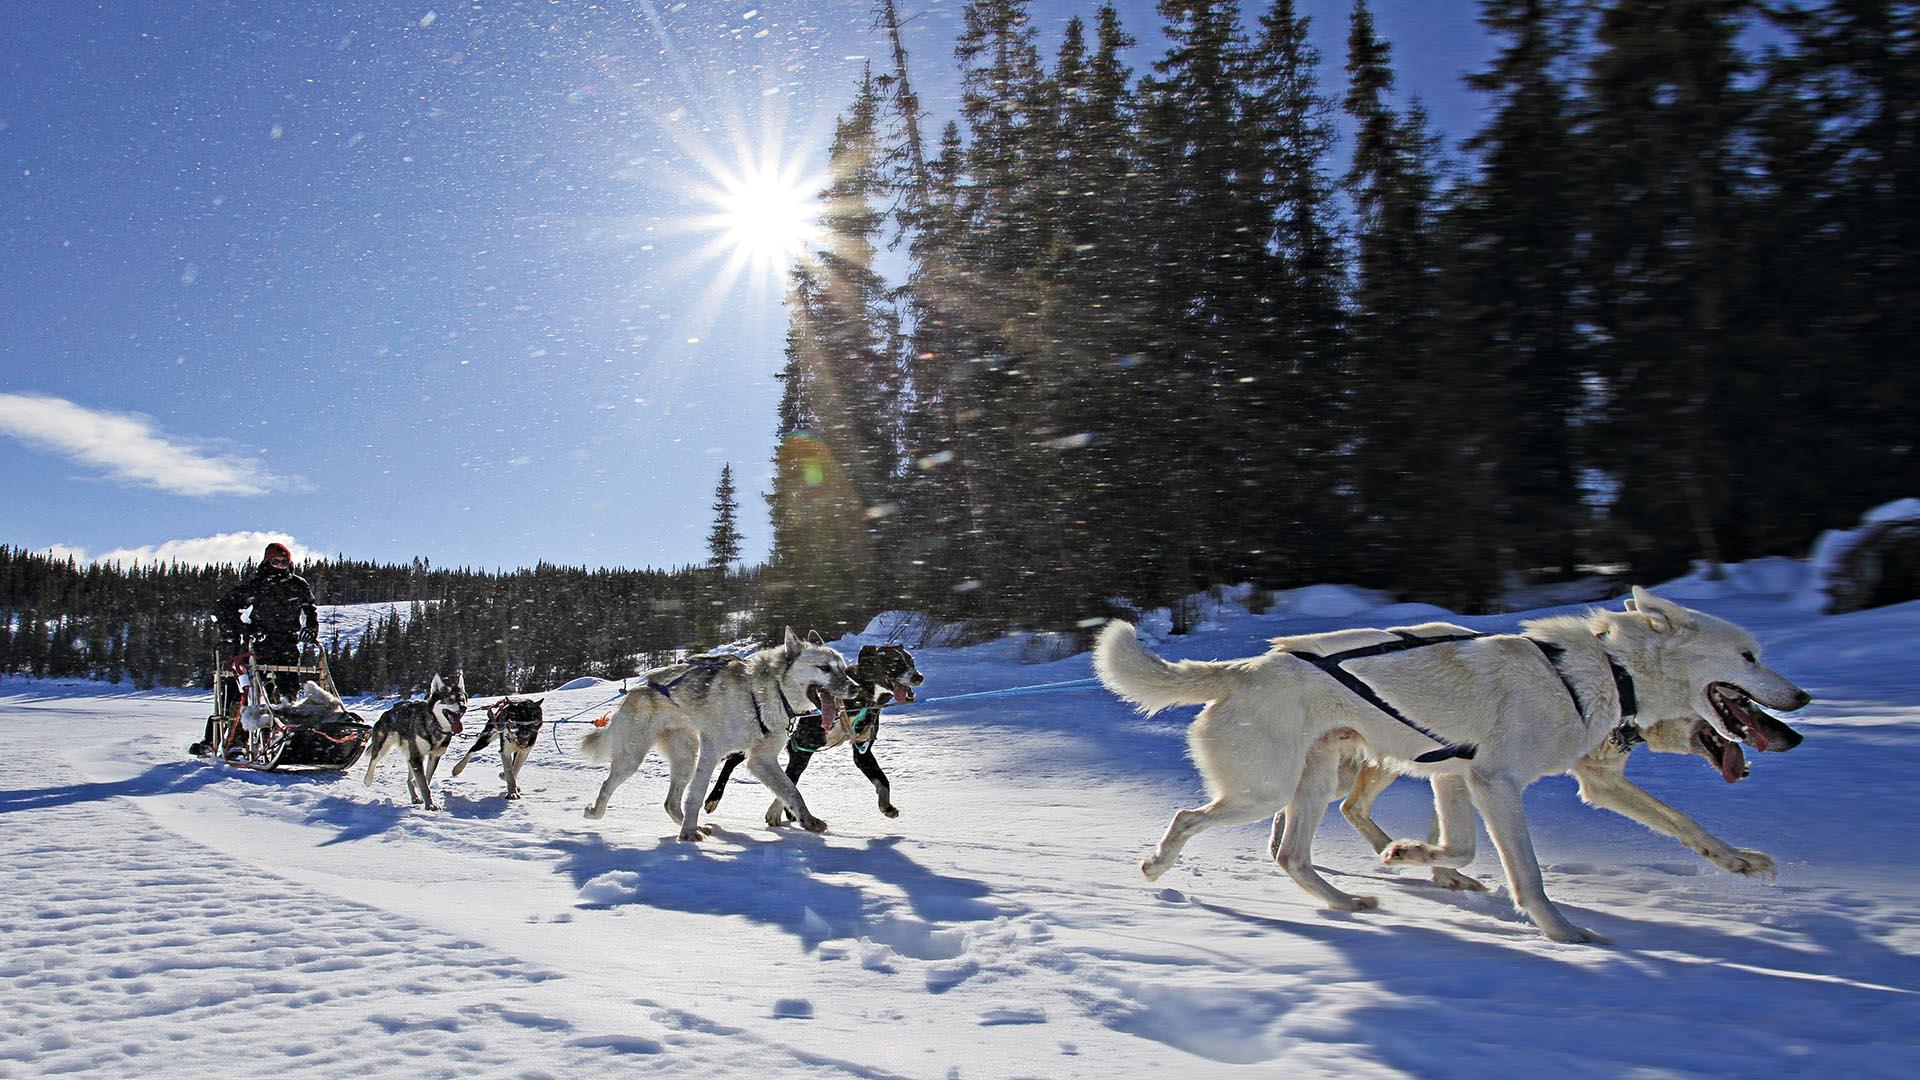 A dog sledding team rushes past in a snow-covered open forest landscape. The sun is shining from a blue sky.